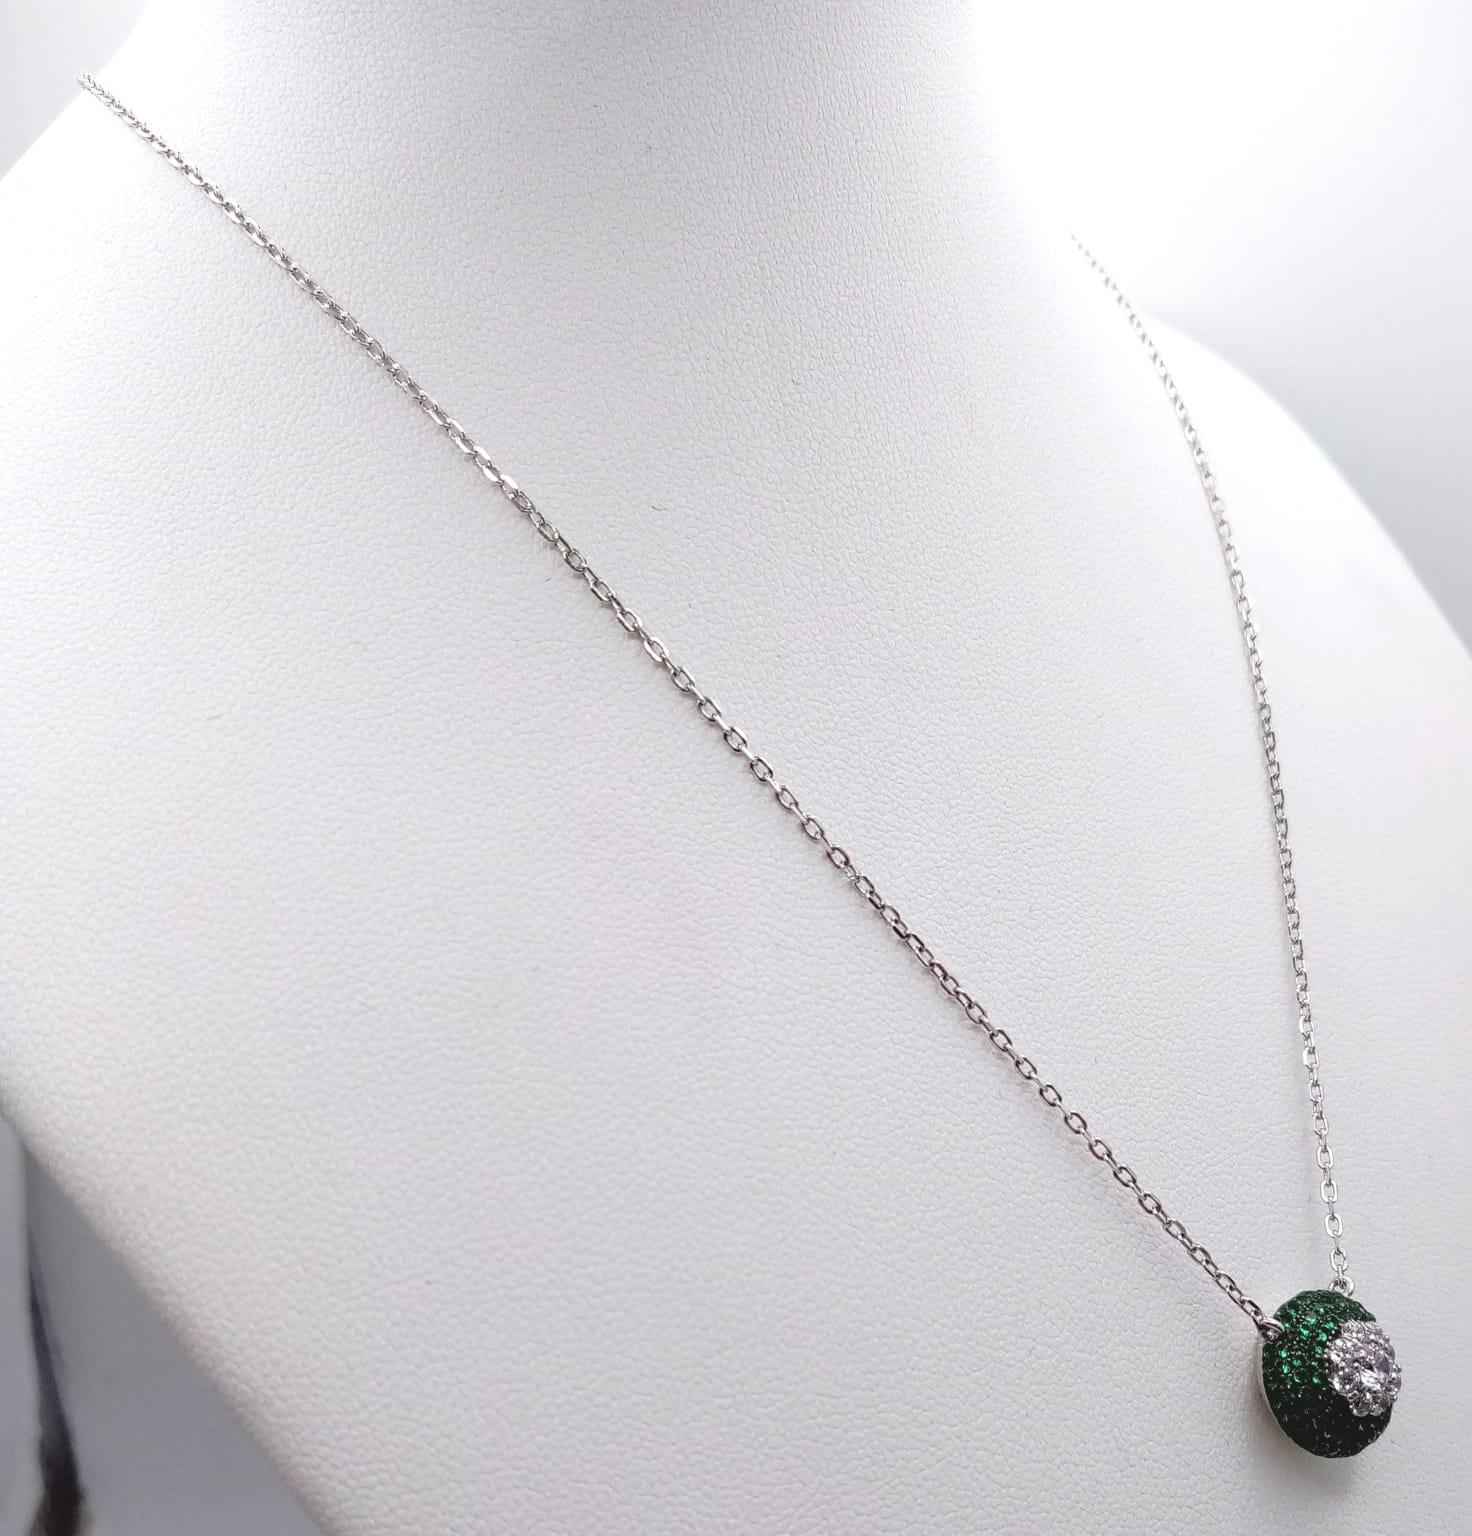 A 925 Silver, Green and White Stone Pendant on a 925 Silver Disappearing Necklace. - Image 3 of 6